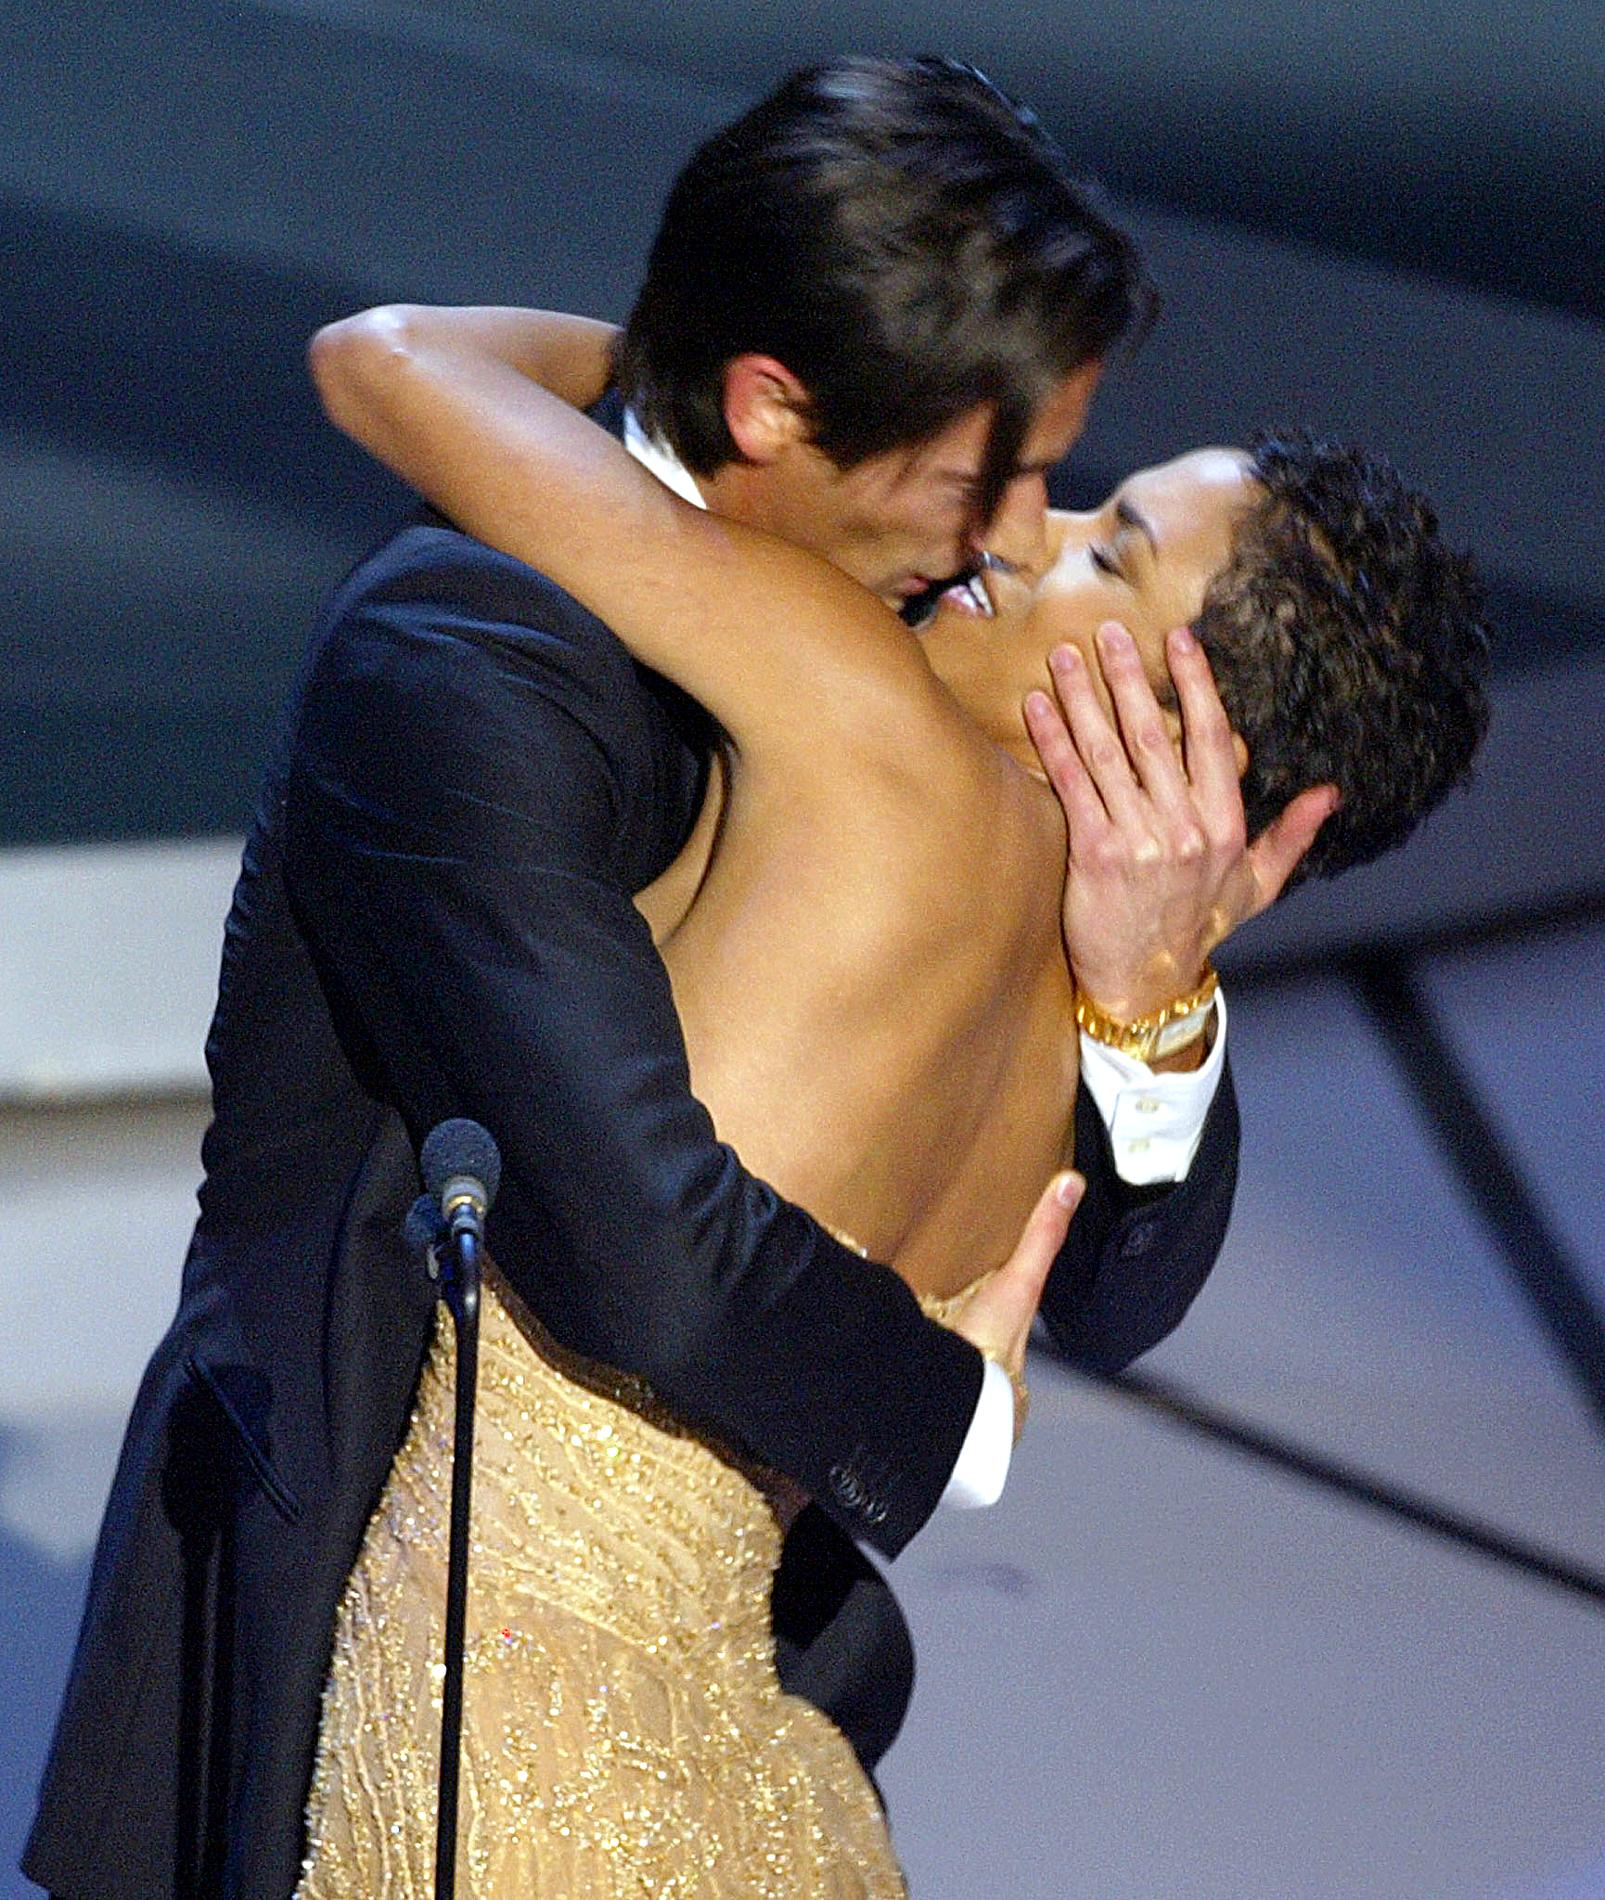 Actor Adrien Brody kisses presenter Halle Berry as he accepts his Oscar in 2003